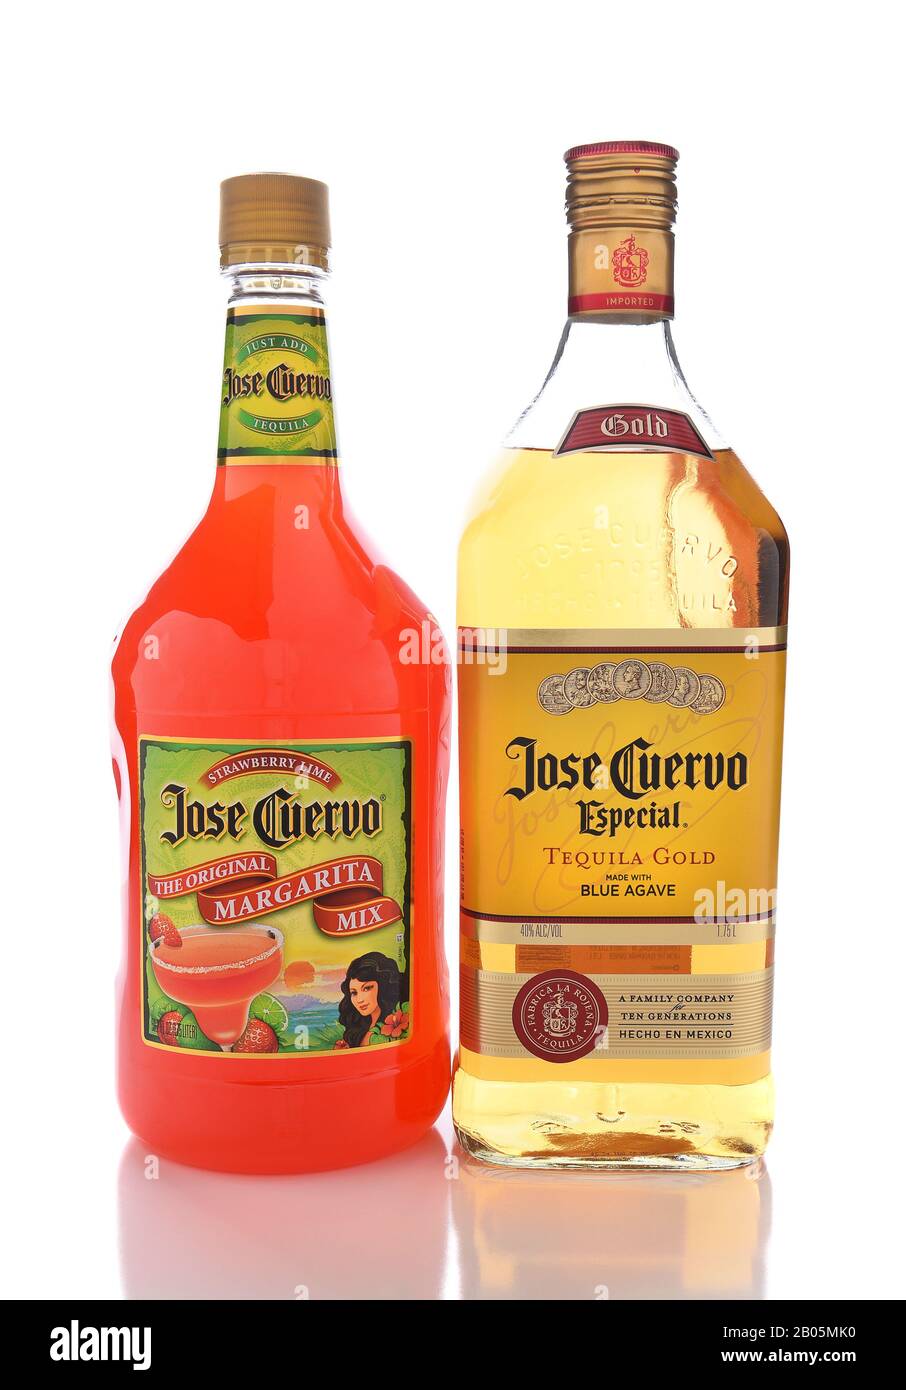 IRVINE, CALIFORNIA - JANUARY 13, 2017: Jose Cuervo Tequila and Strawberry Margarita Mix. Cuervo is the best selling tequila in the world. Stock Photo